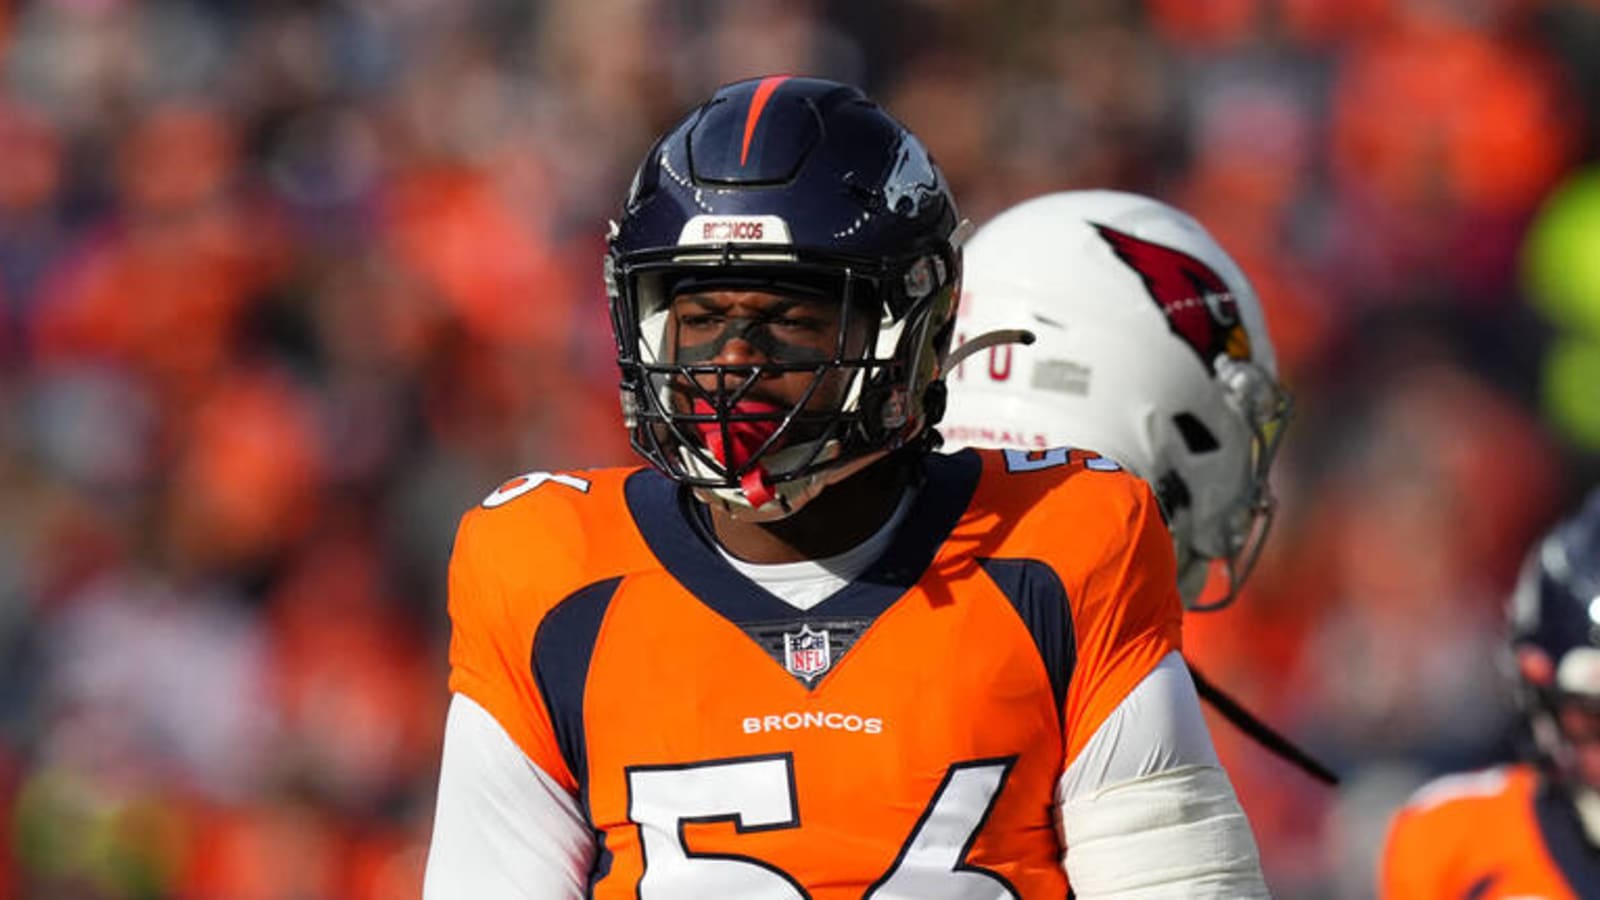 Broncos OLB Baron Browning Had Surgery On Partially Torn Meniscus